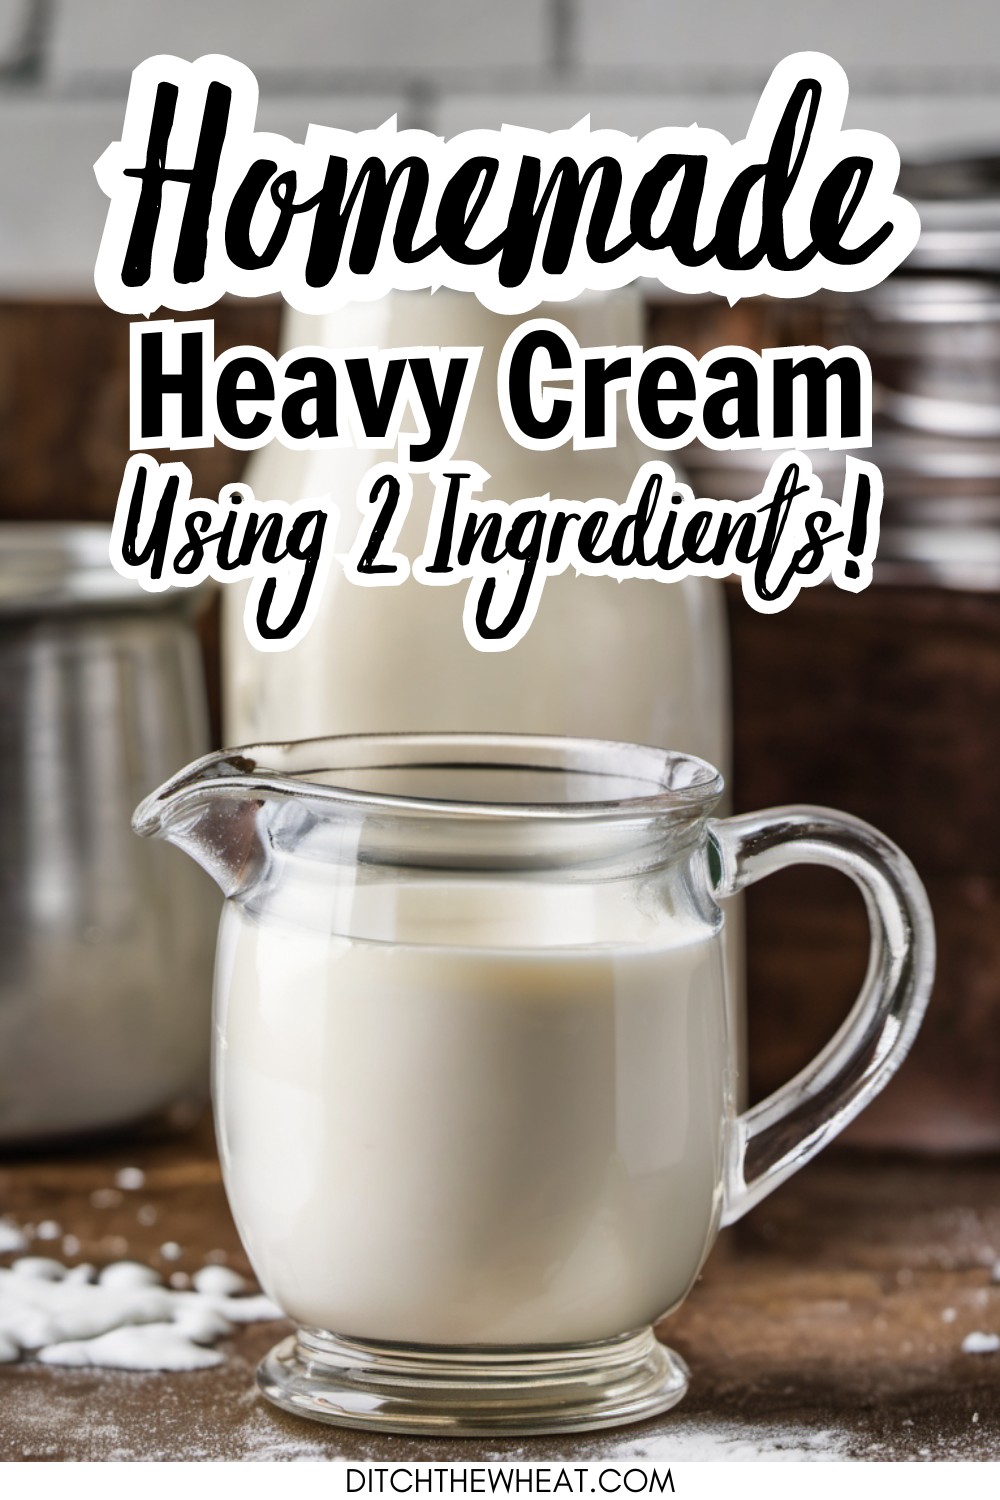 A glass creamer filled with heavy cream and a milk jug behind it.